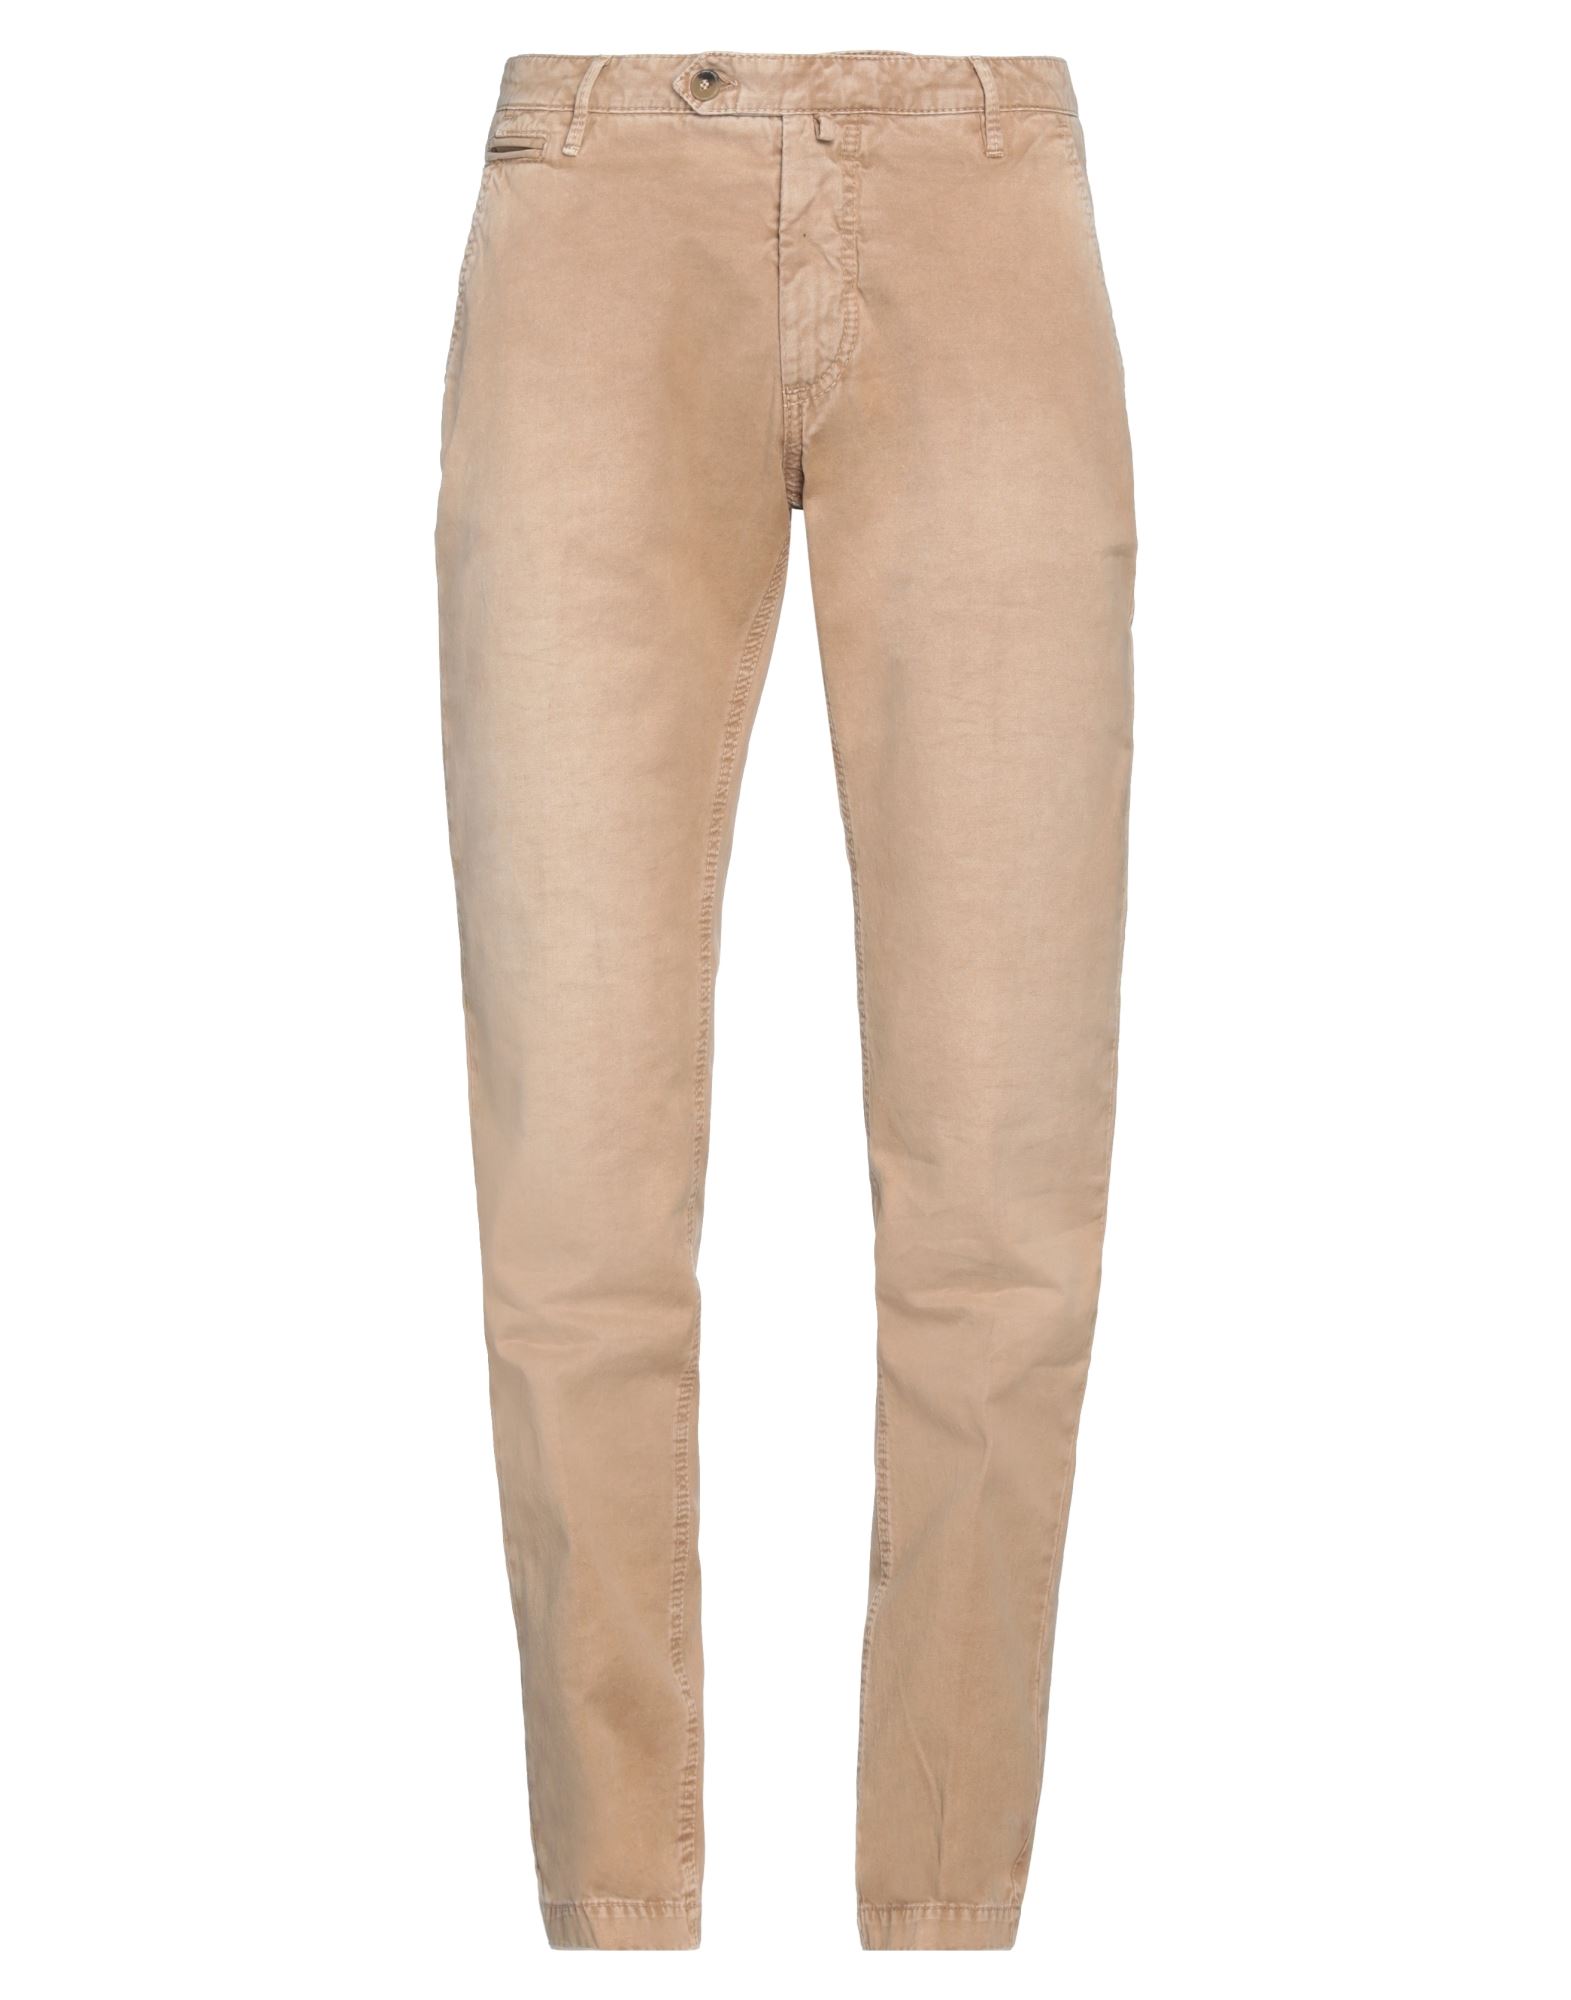 Jacob Cohёn Pants In Sand